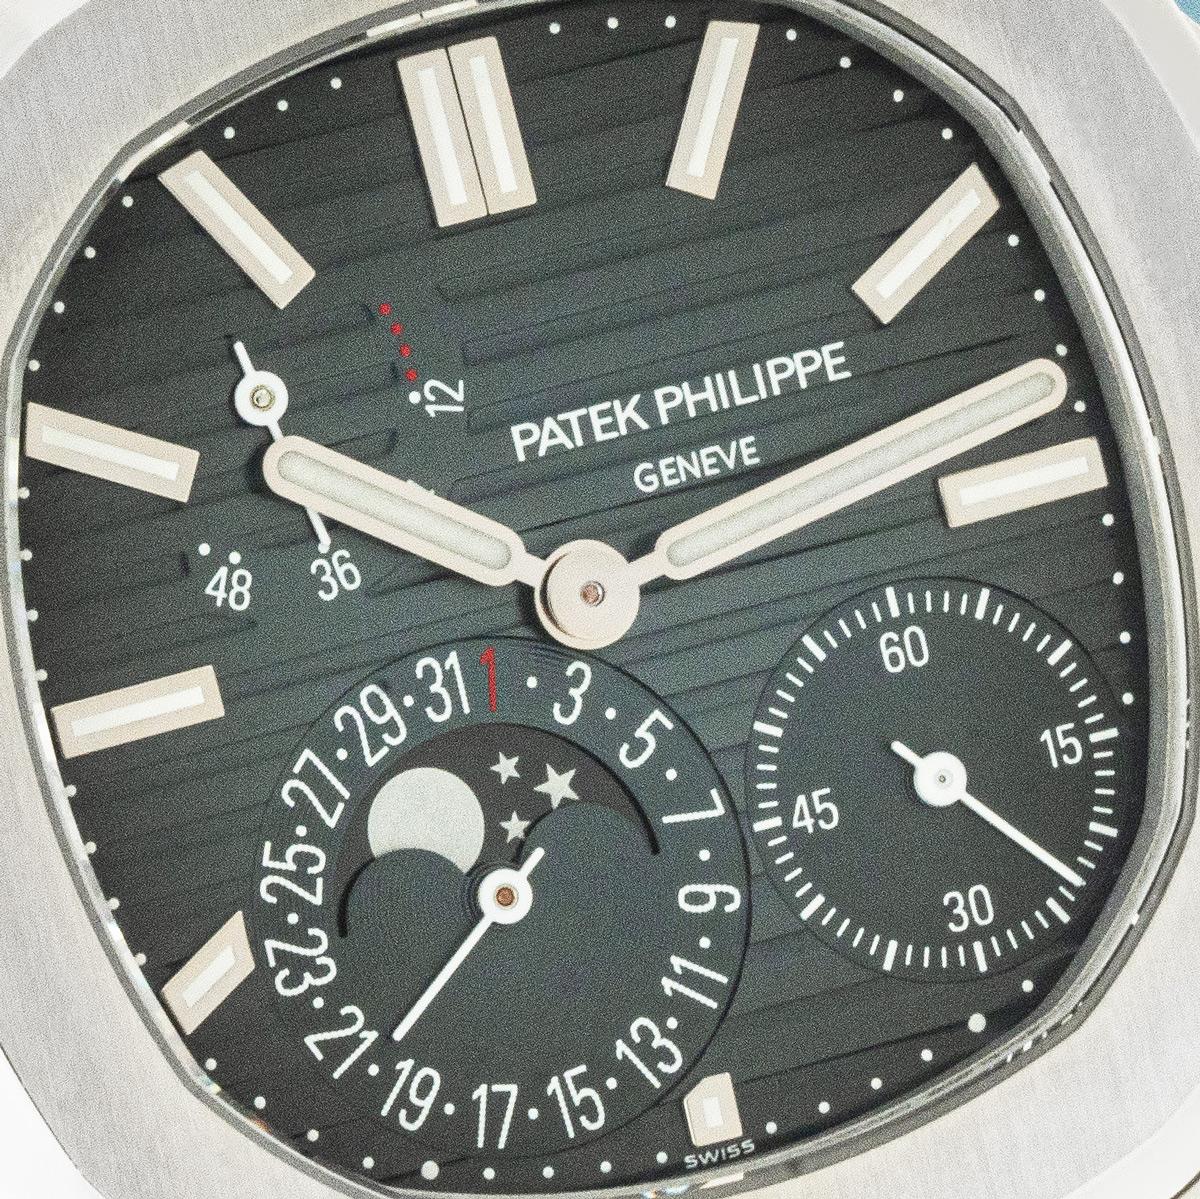 Patek Philippe Nautilus Stainless Steel 5712/1A-001 In Excellent Condition For Sale In London, GB